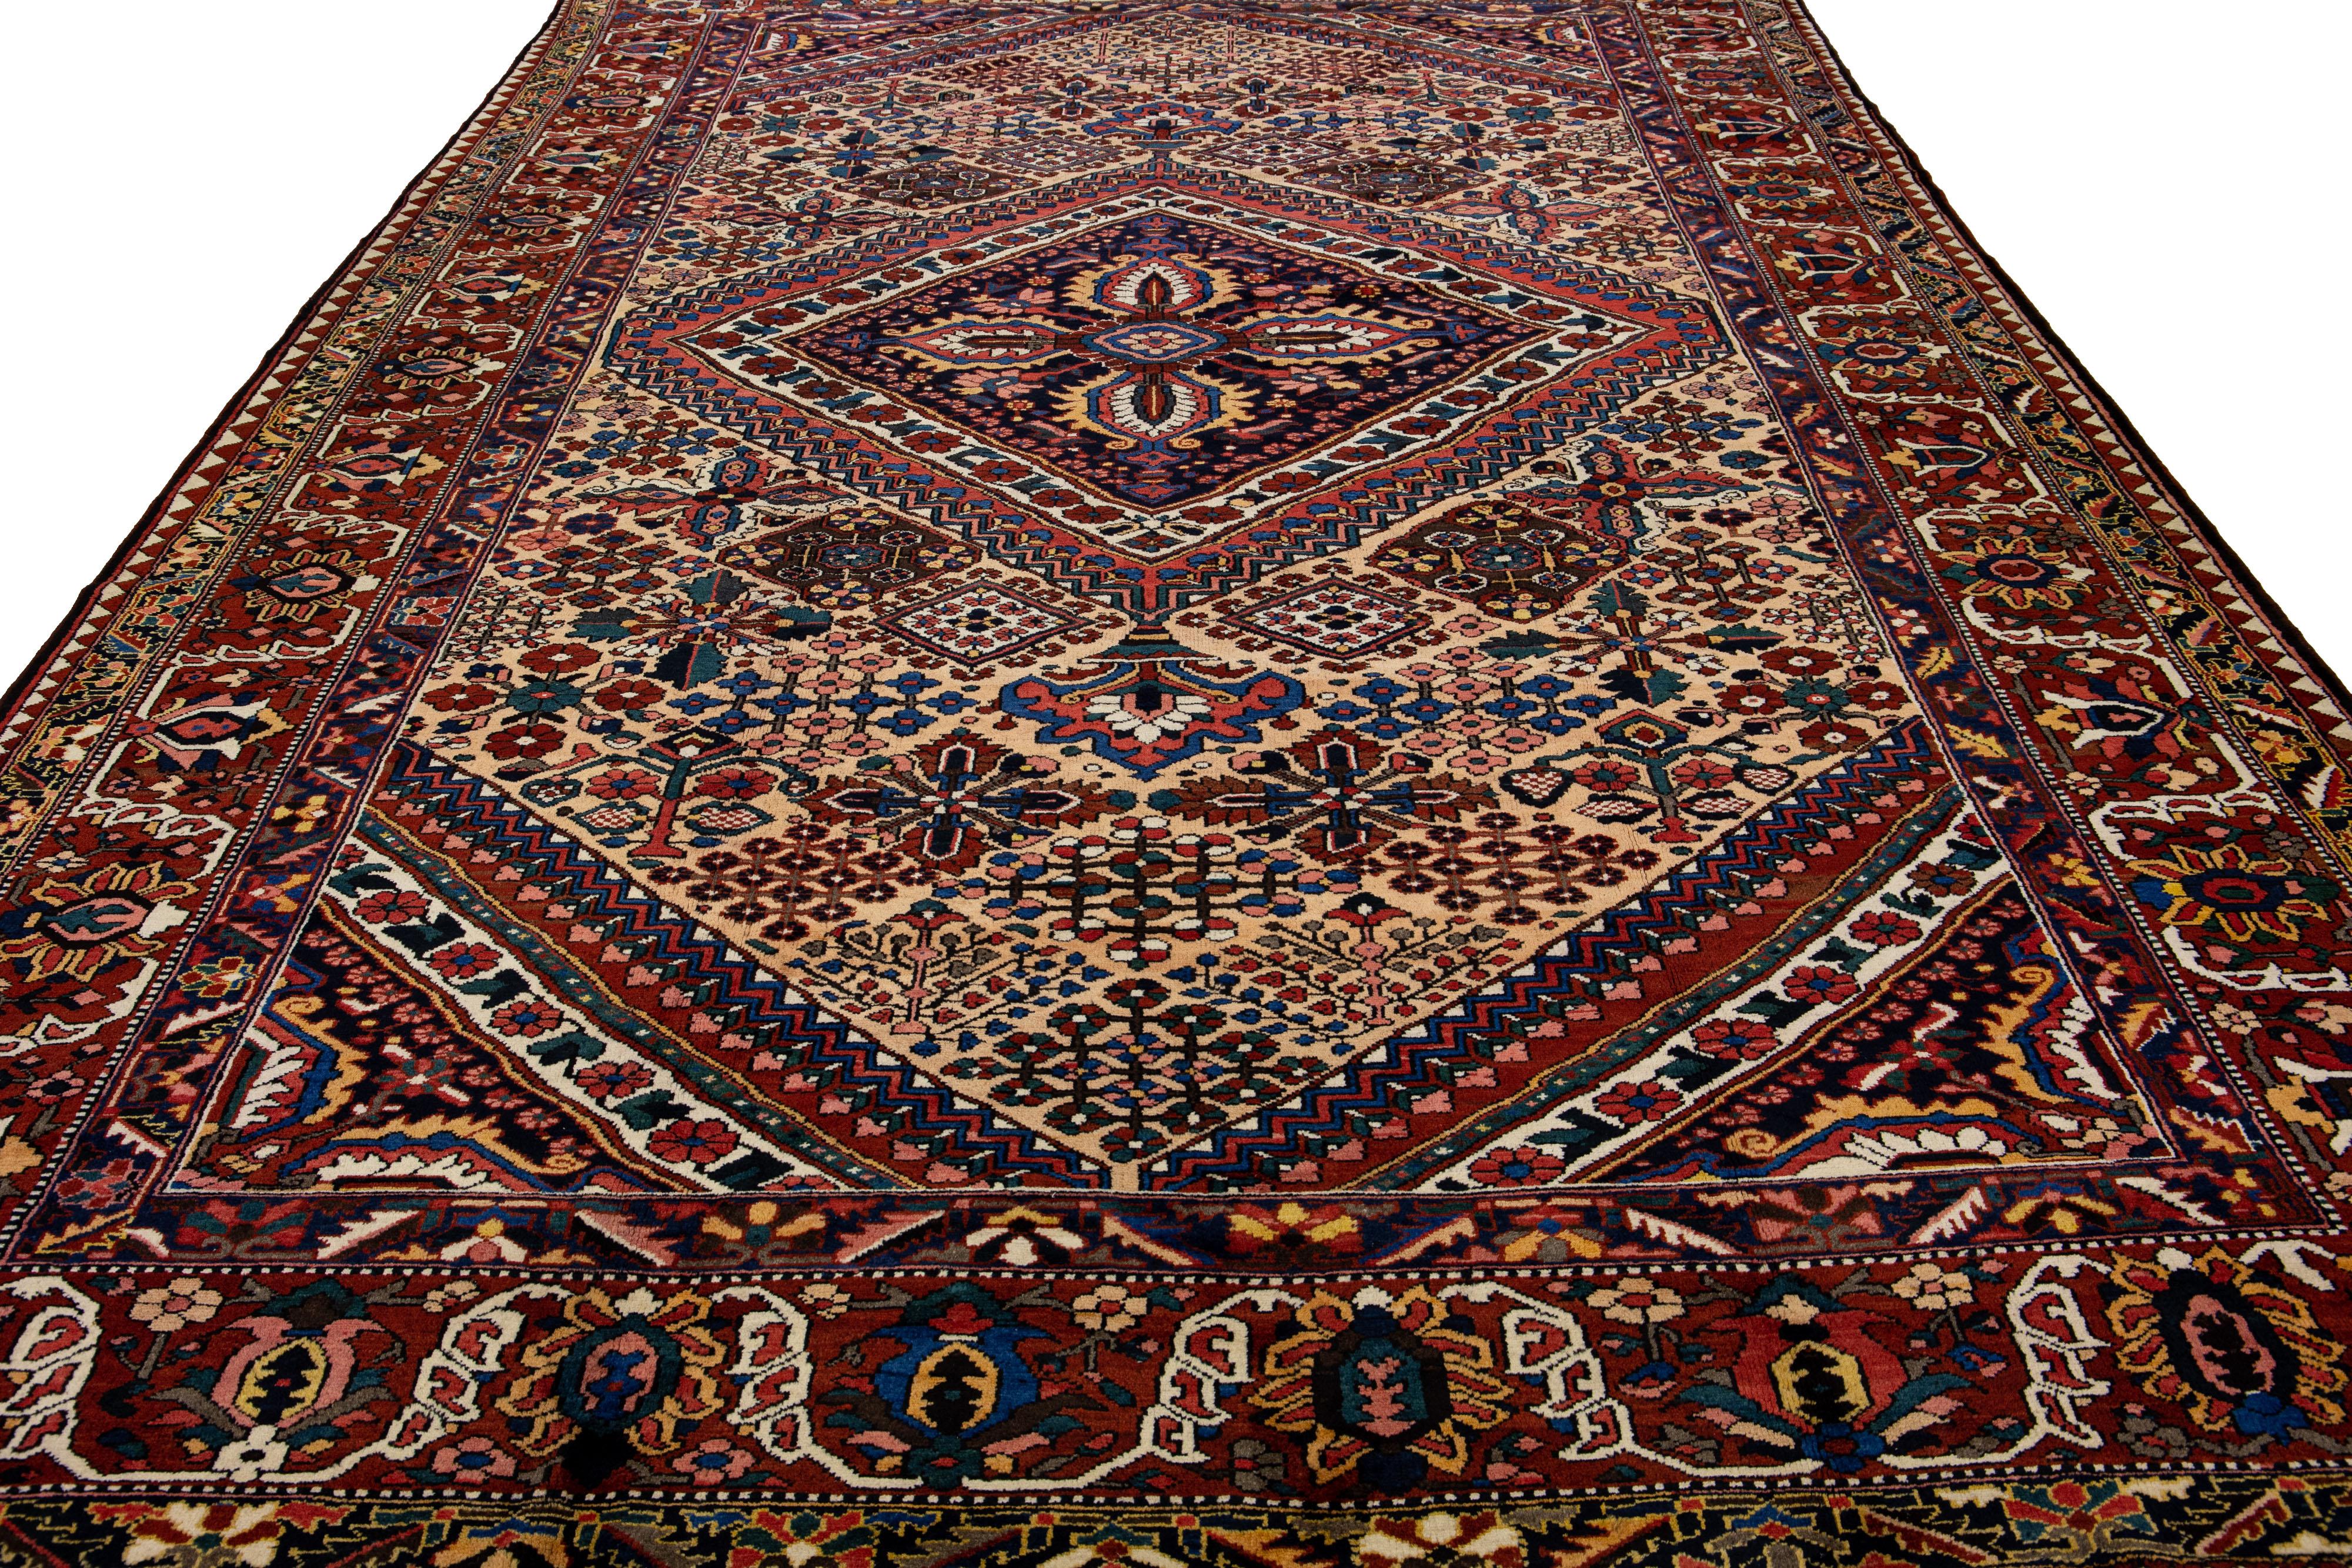 Beautiful Antique Bakhtiari hand-knotted wool rug with a tan color field. This Persian piece has an all-over multicolor accent in a gorgeous classic Medallion motif.

This rug measures 11'5